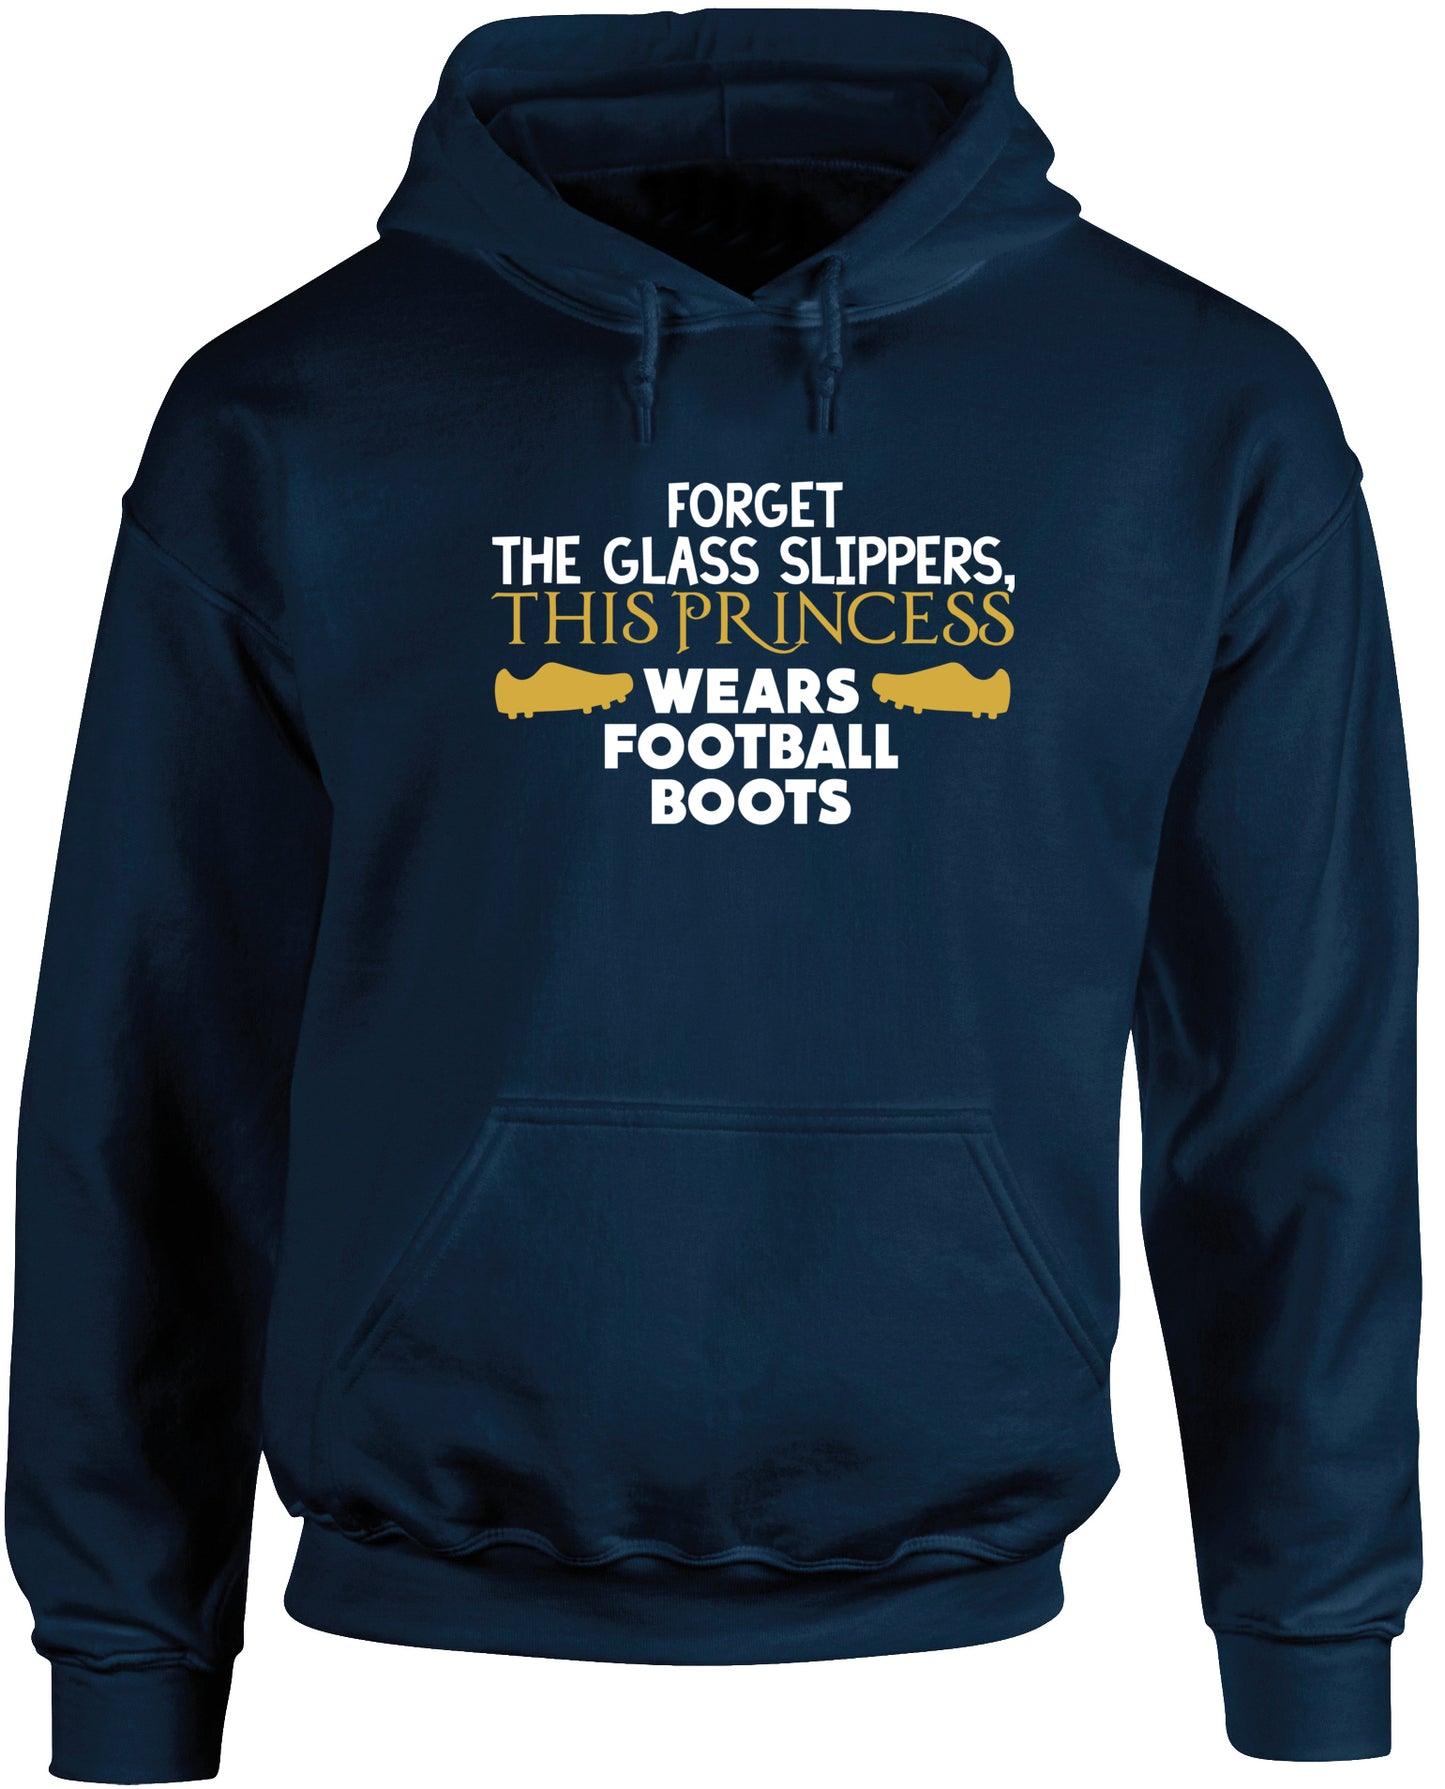 Forget the glass slippers, This princess wears football boots unisex Hoodie hooded top